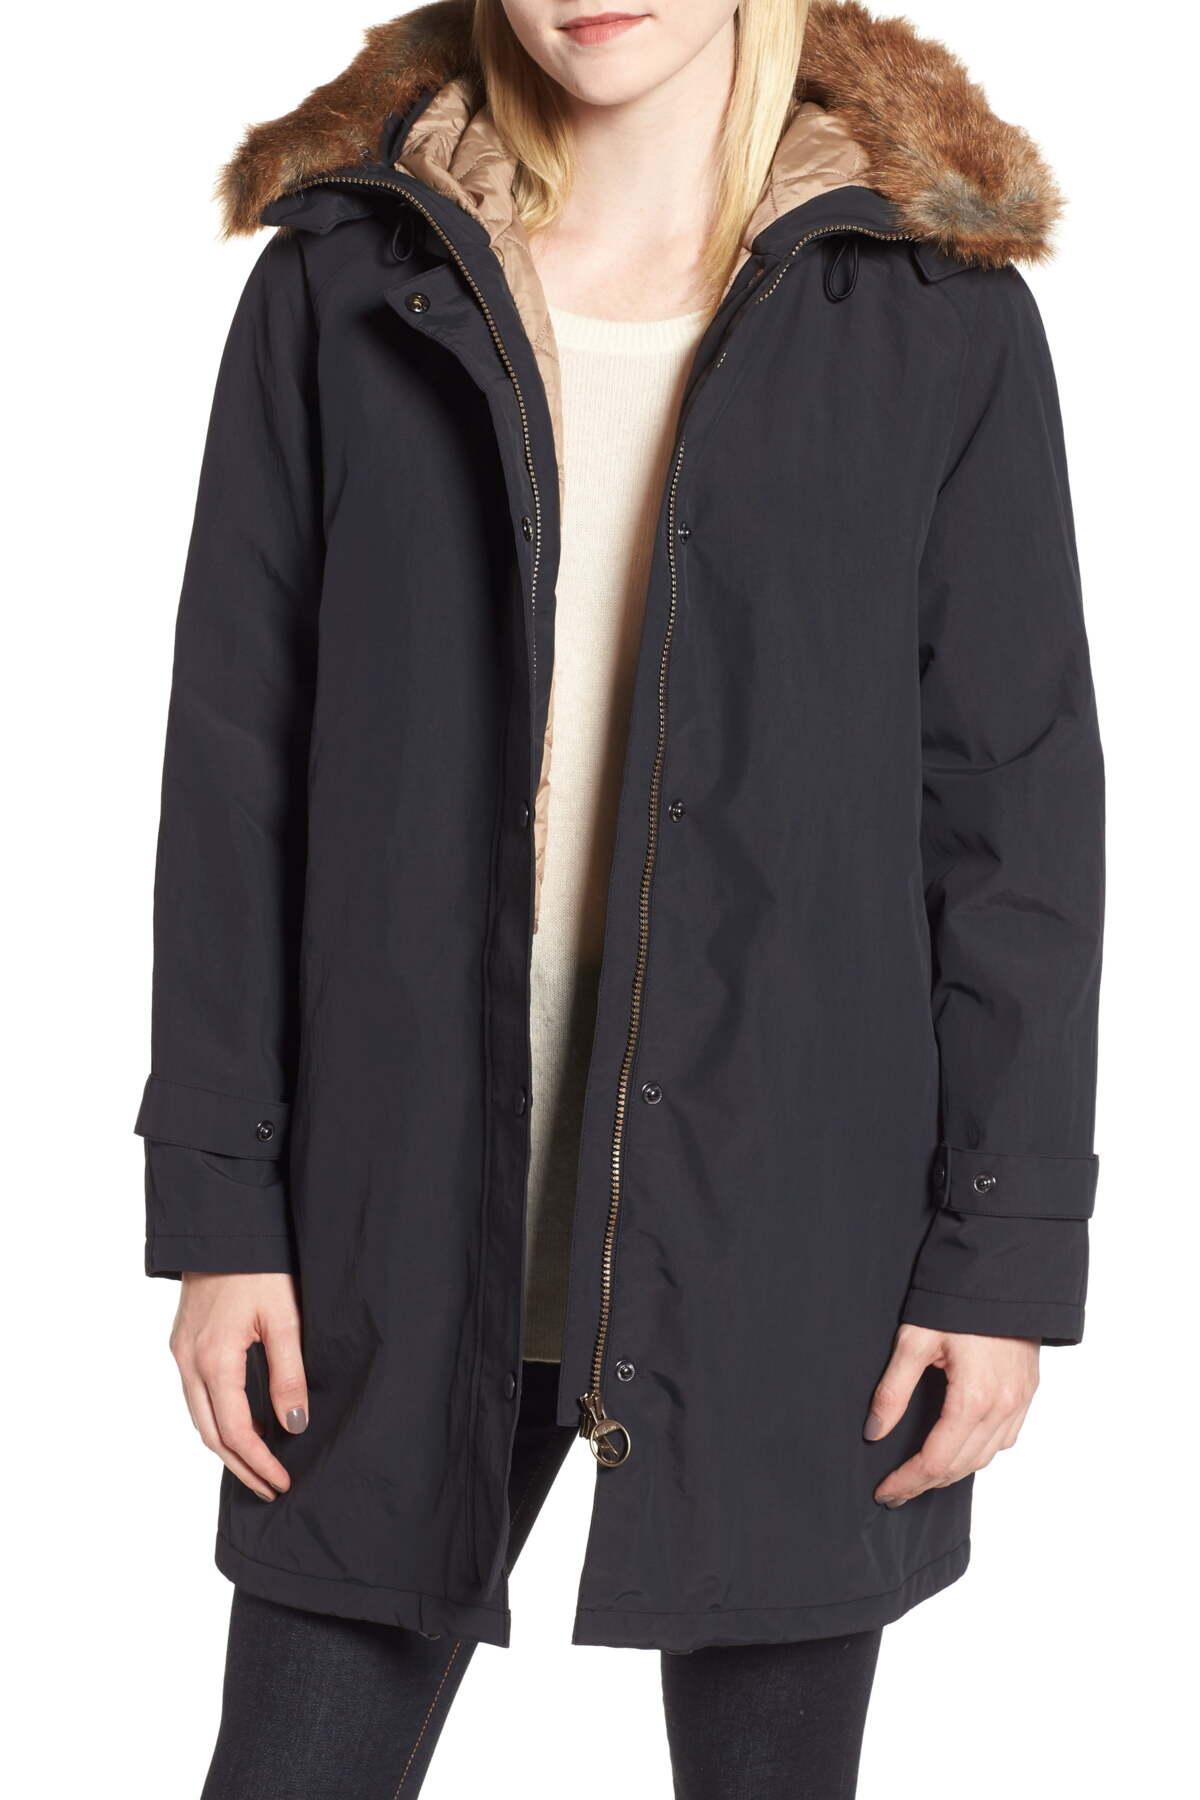 Barbour Dexy Jacket With Faux Fur Trim in Black - Lyst